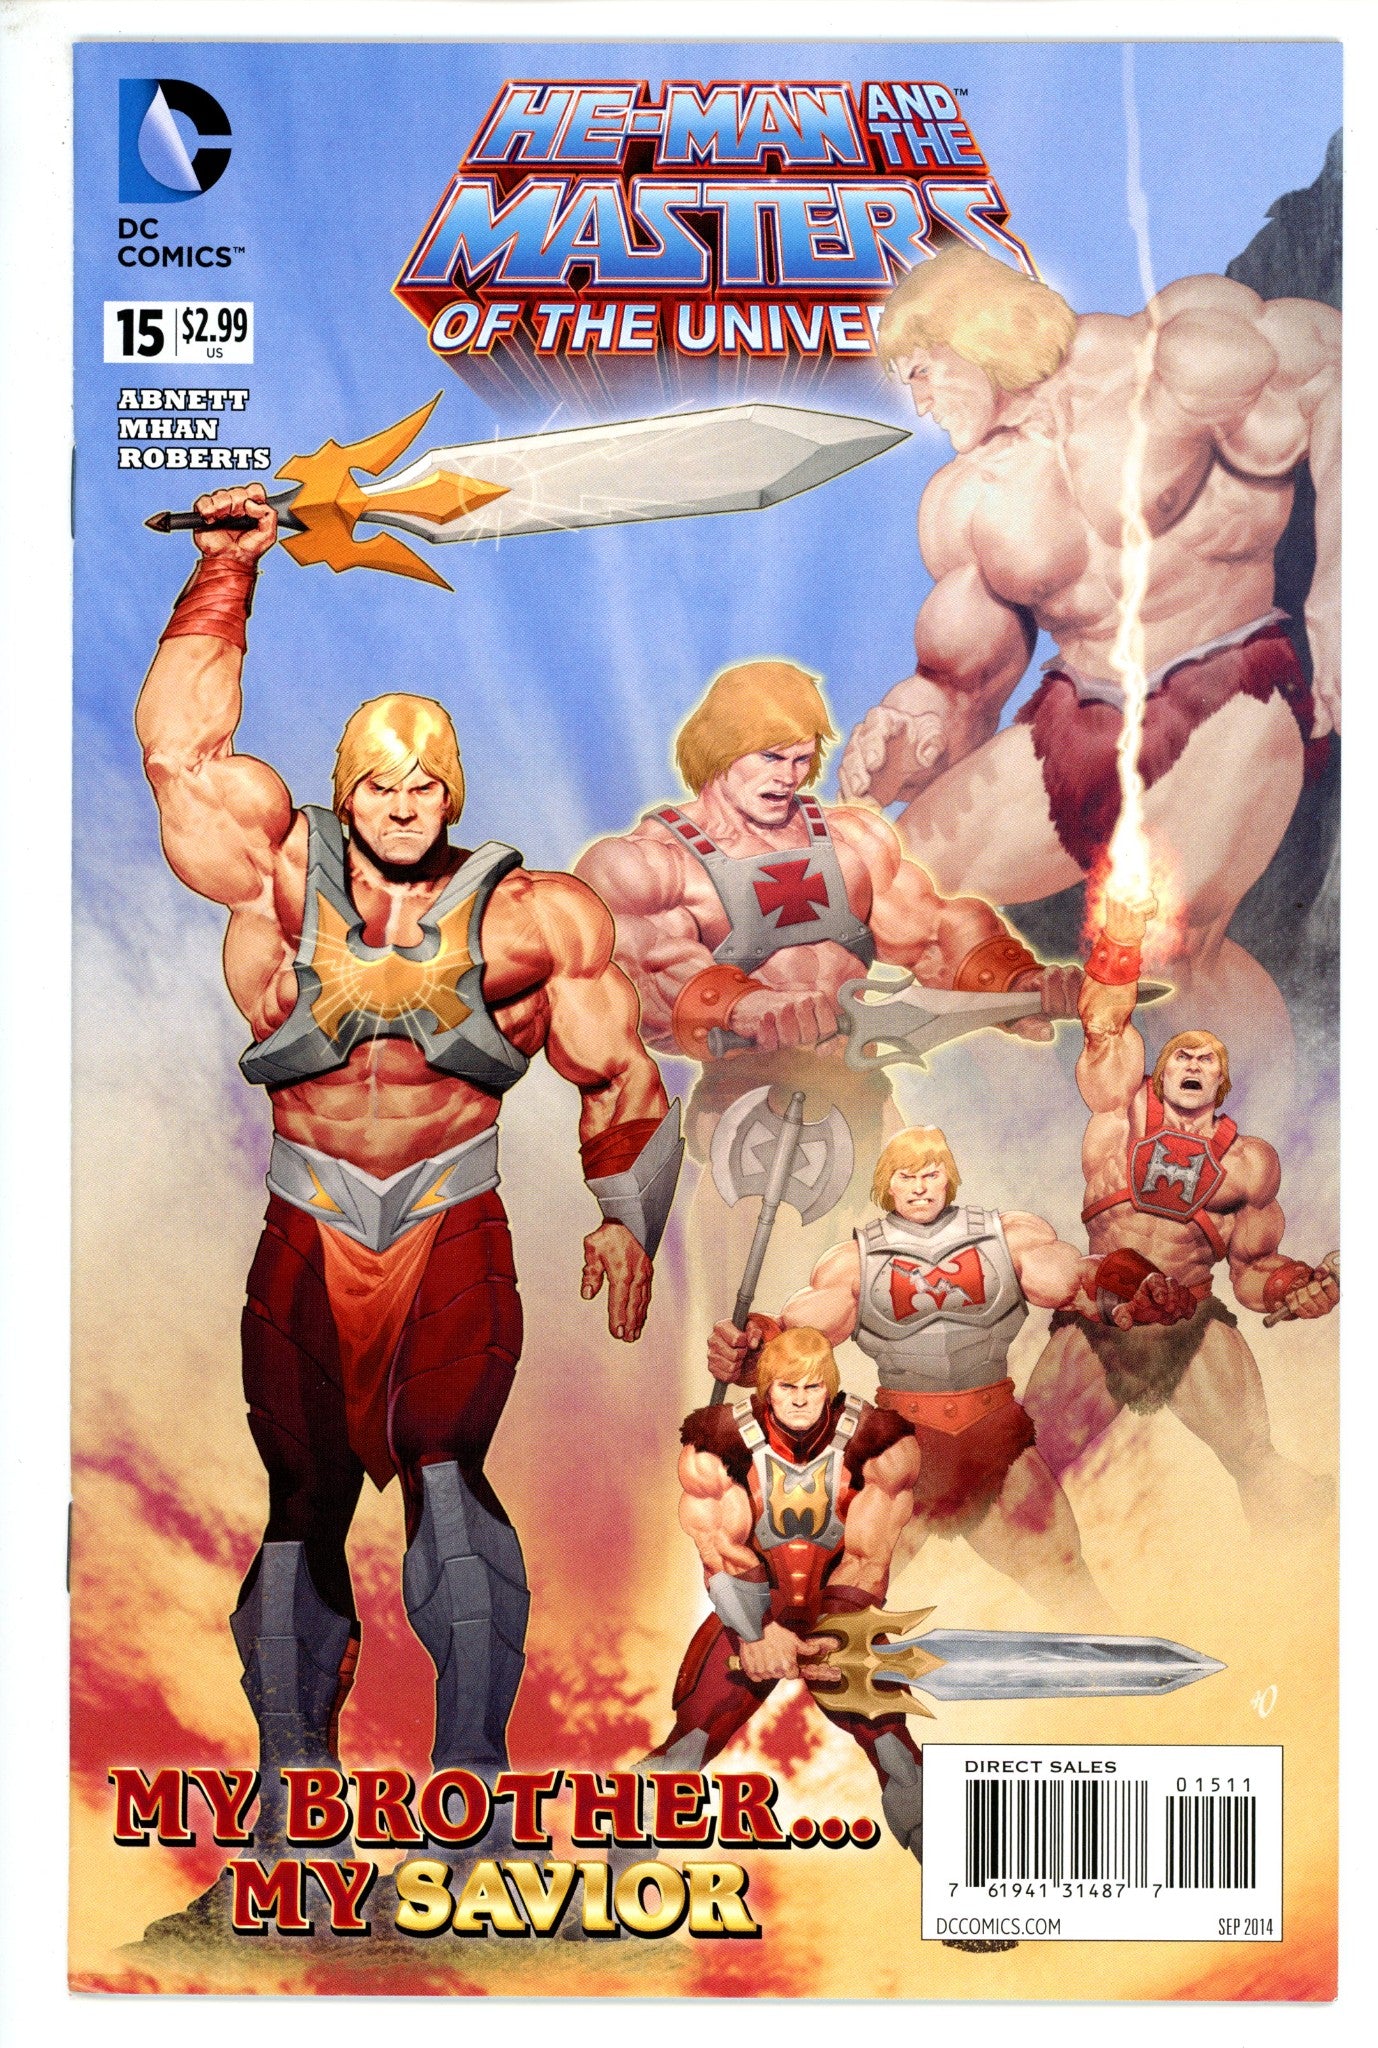 He-Man and the Masters of the Universe Vol 2 15  VF/NM